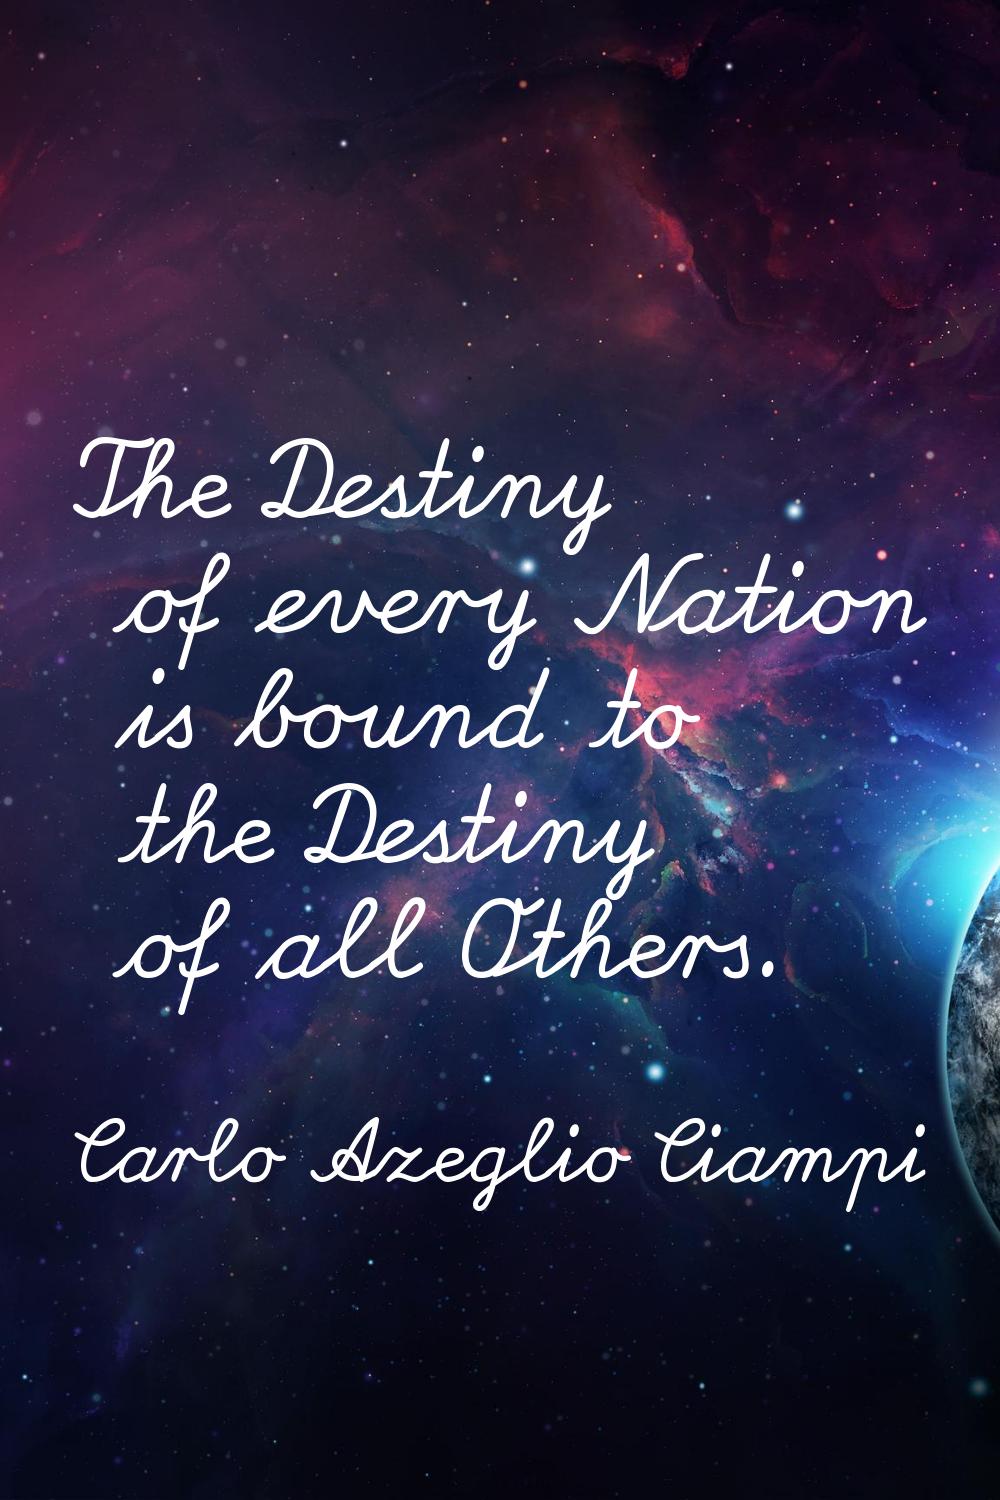 The Destiny of every Nation is bound to the Destiny of all Others.